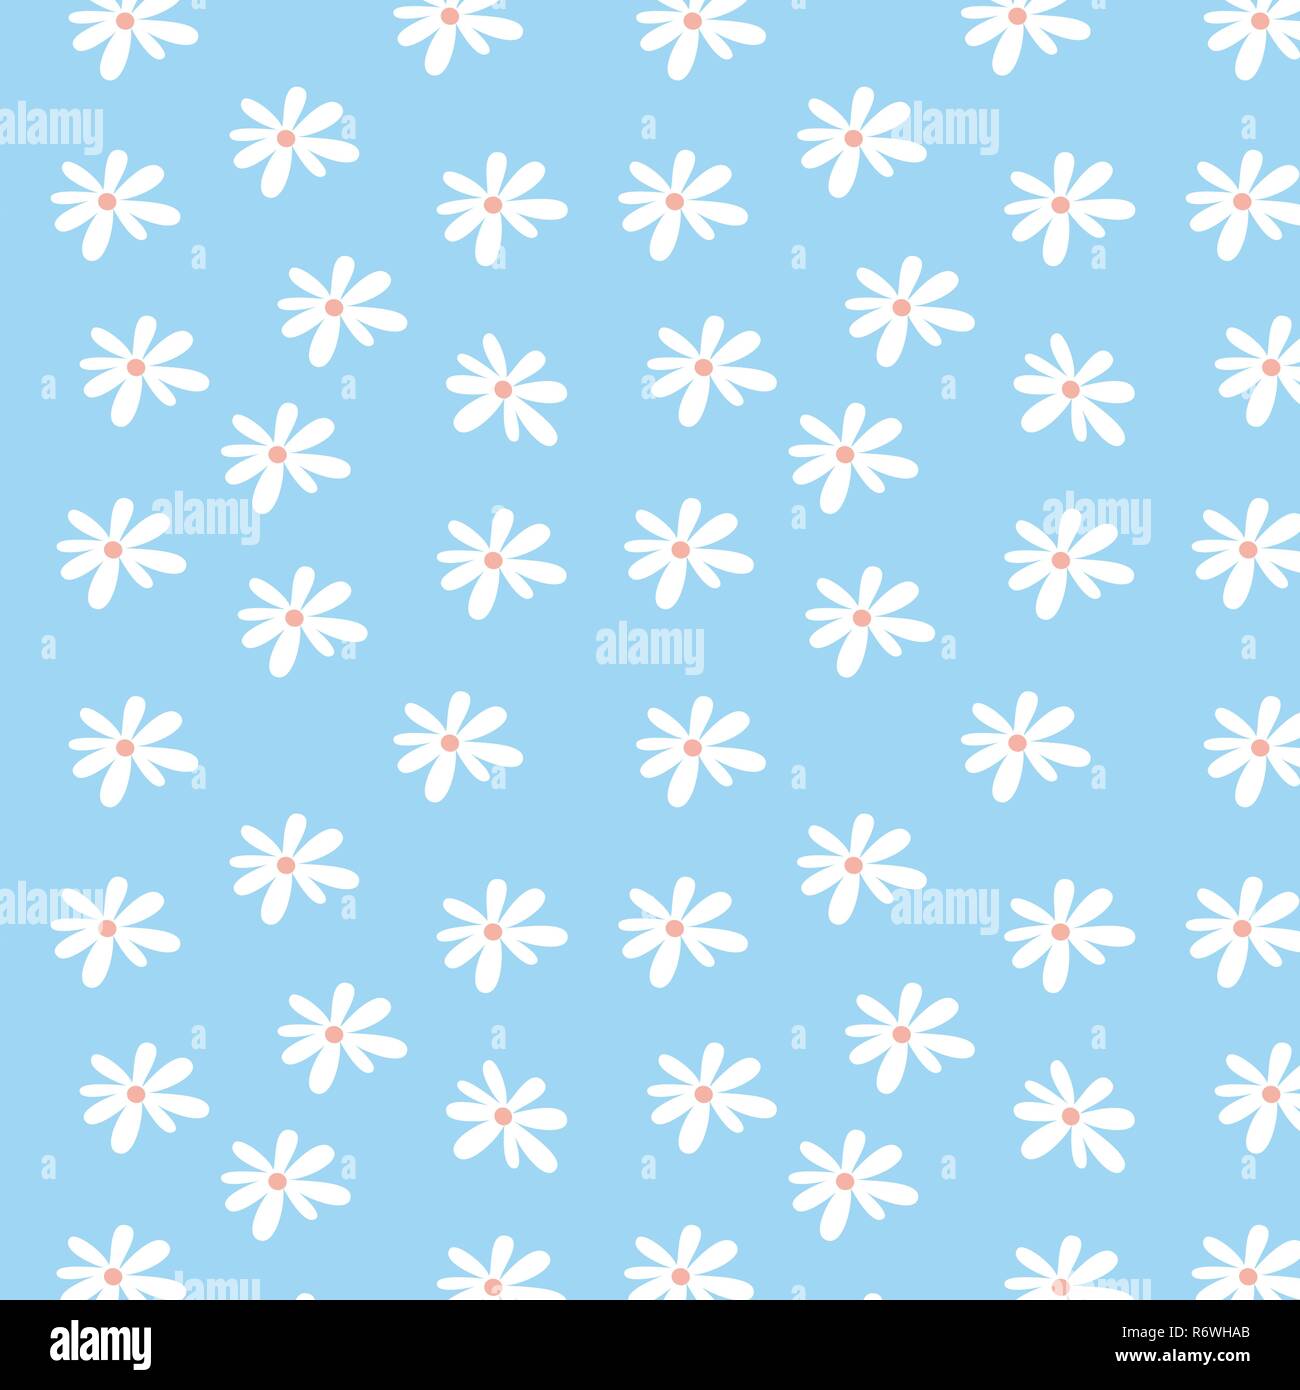 Daisy flowers vector pattern on a light blue background Stock Vector